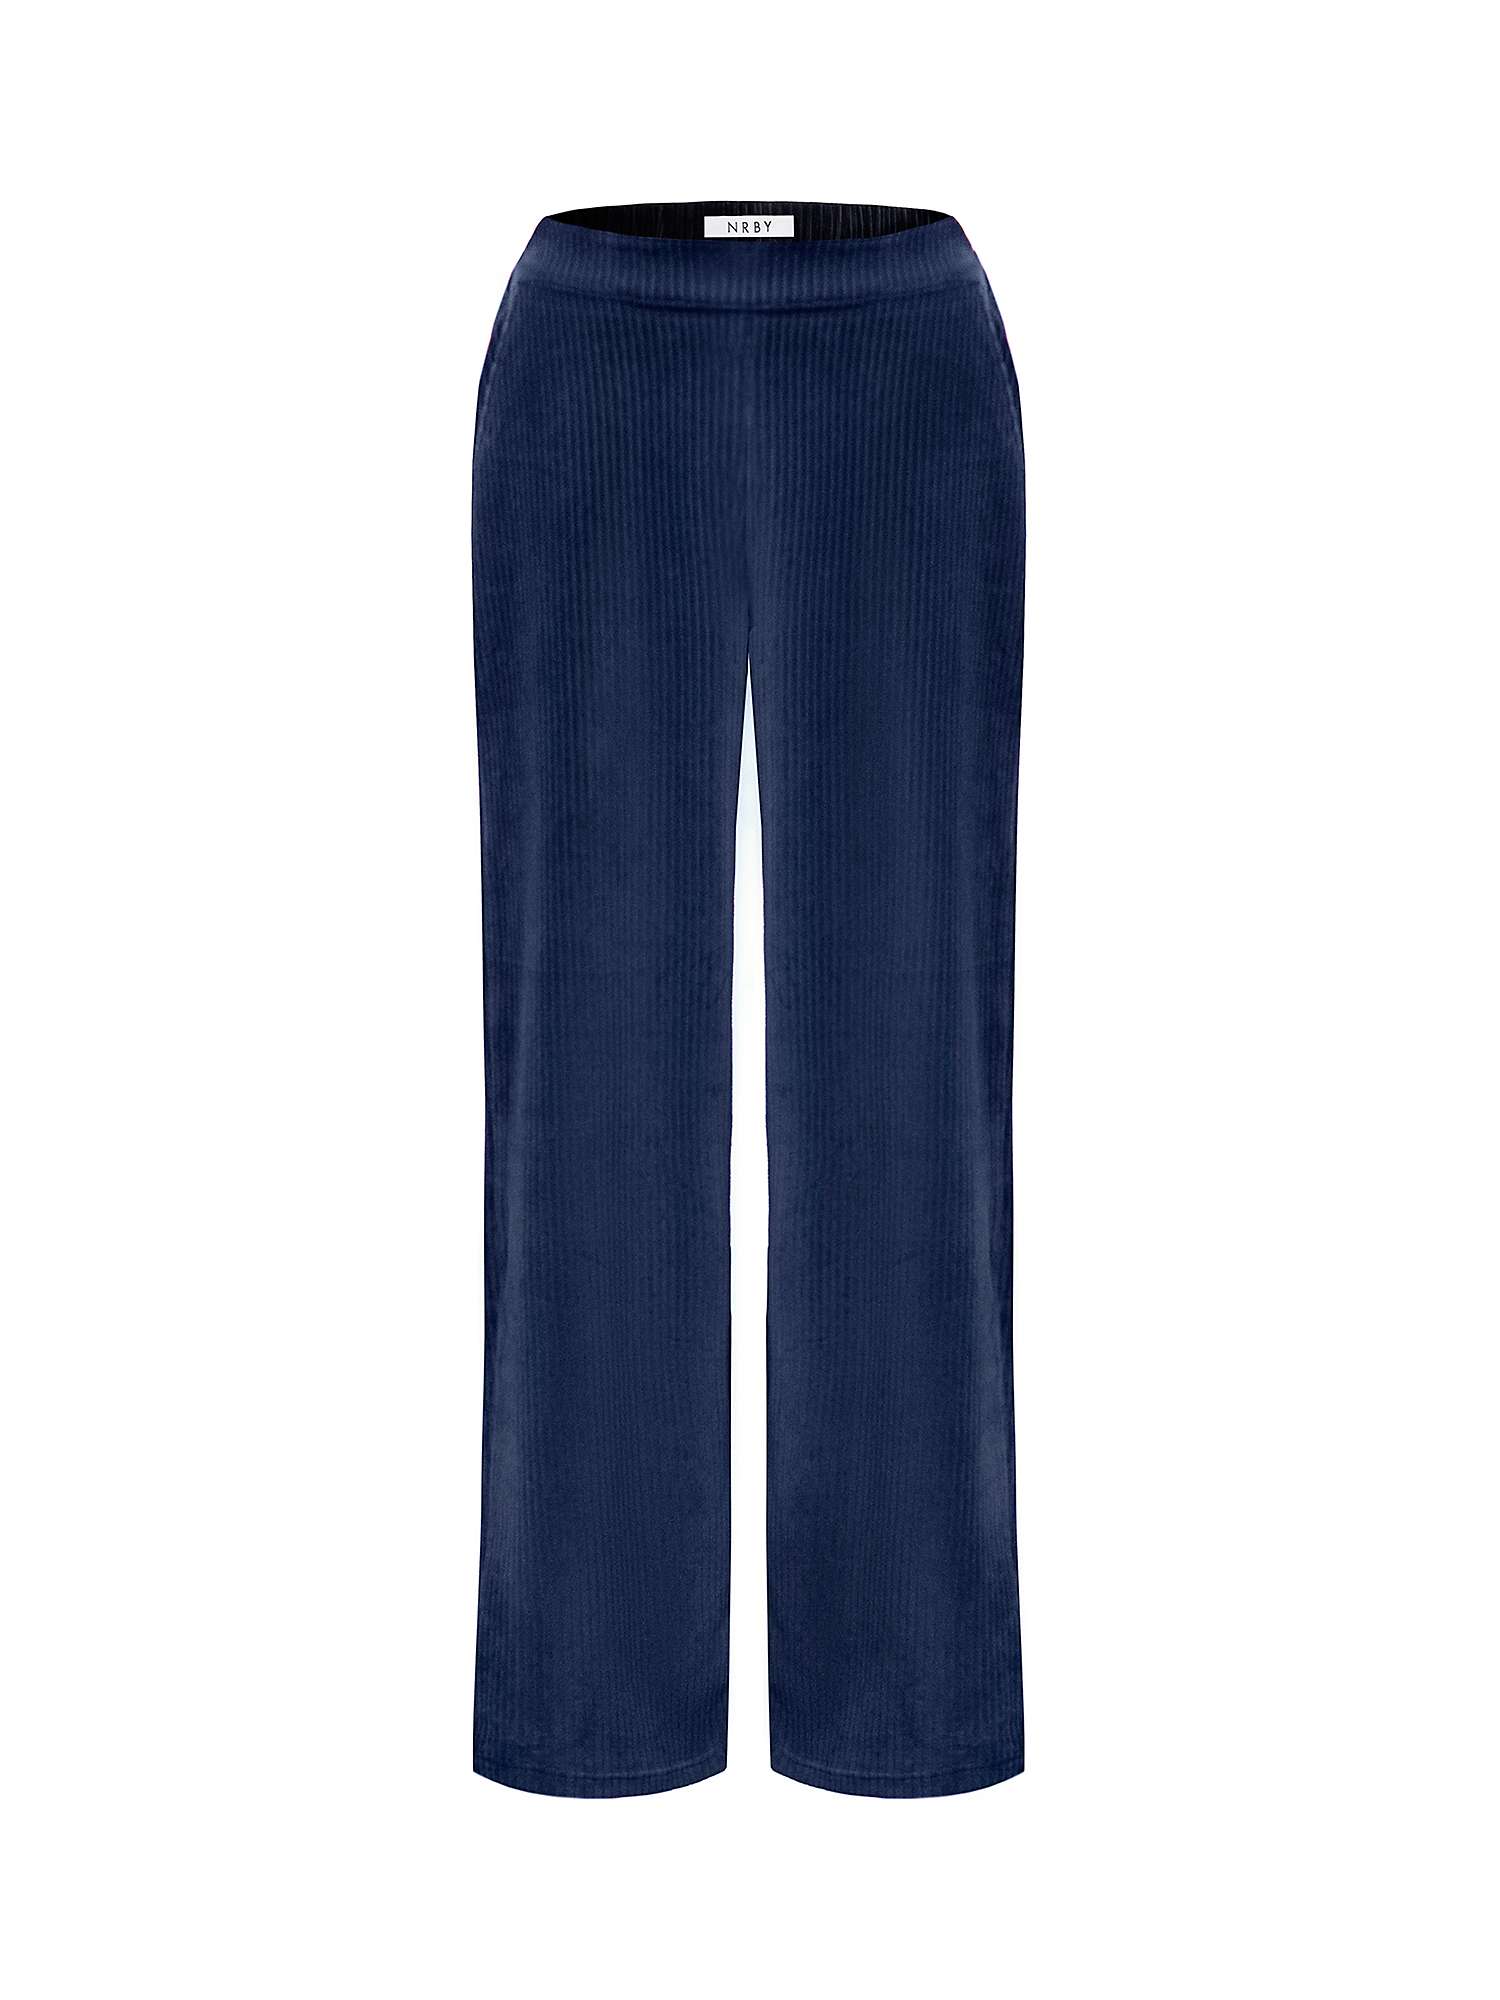 Buy NRBY Thea Ribbed Velour Trousers, Smoke Grey Online at johnlewis.com